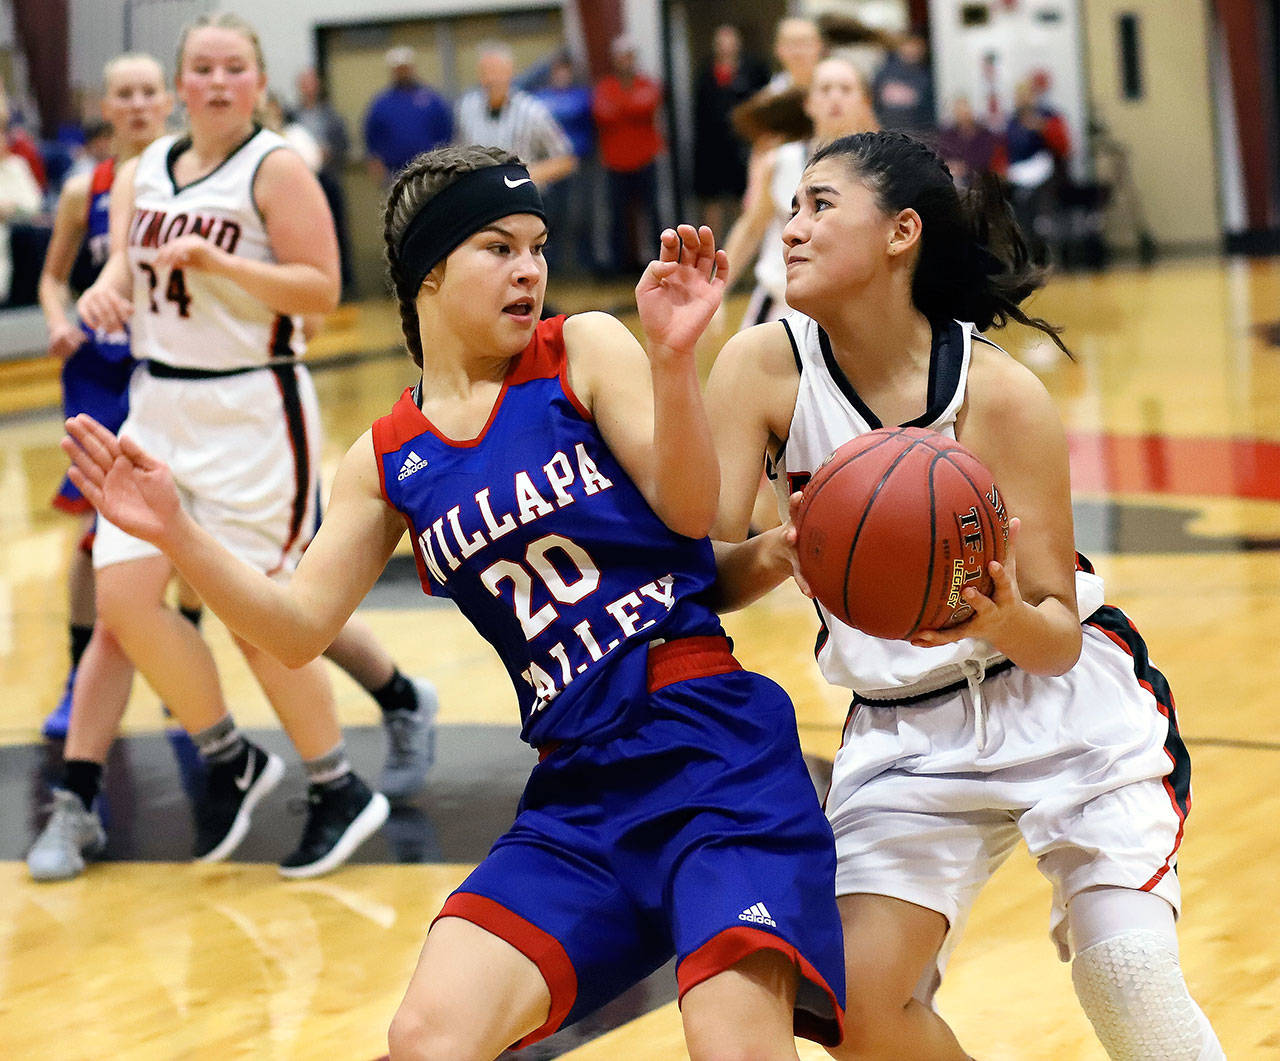 Willapa Valley’s Brooke Friese, left, pressures Raymond’s Ana Silva during a game on Thursday at Raymond High School. (Photo by Larry Bale)